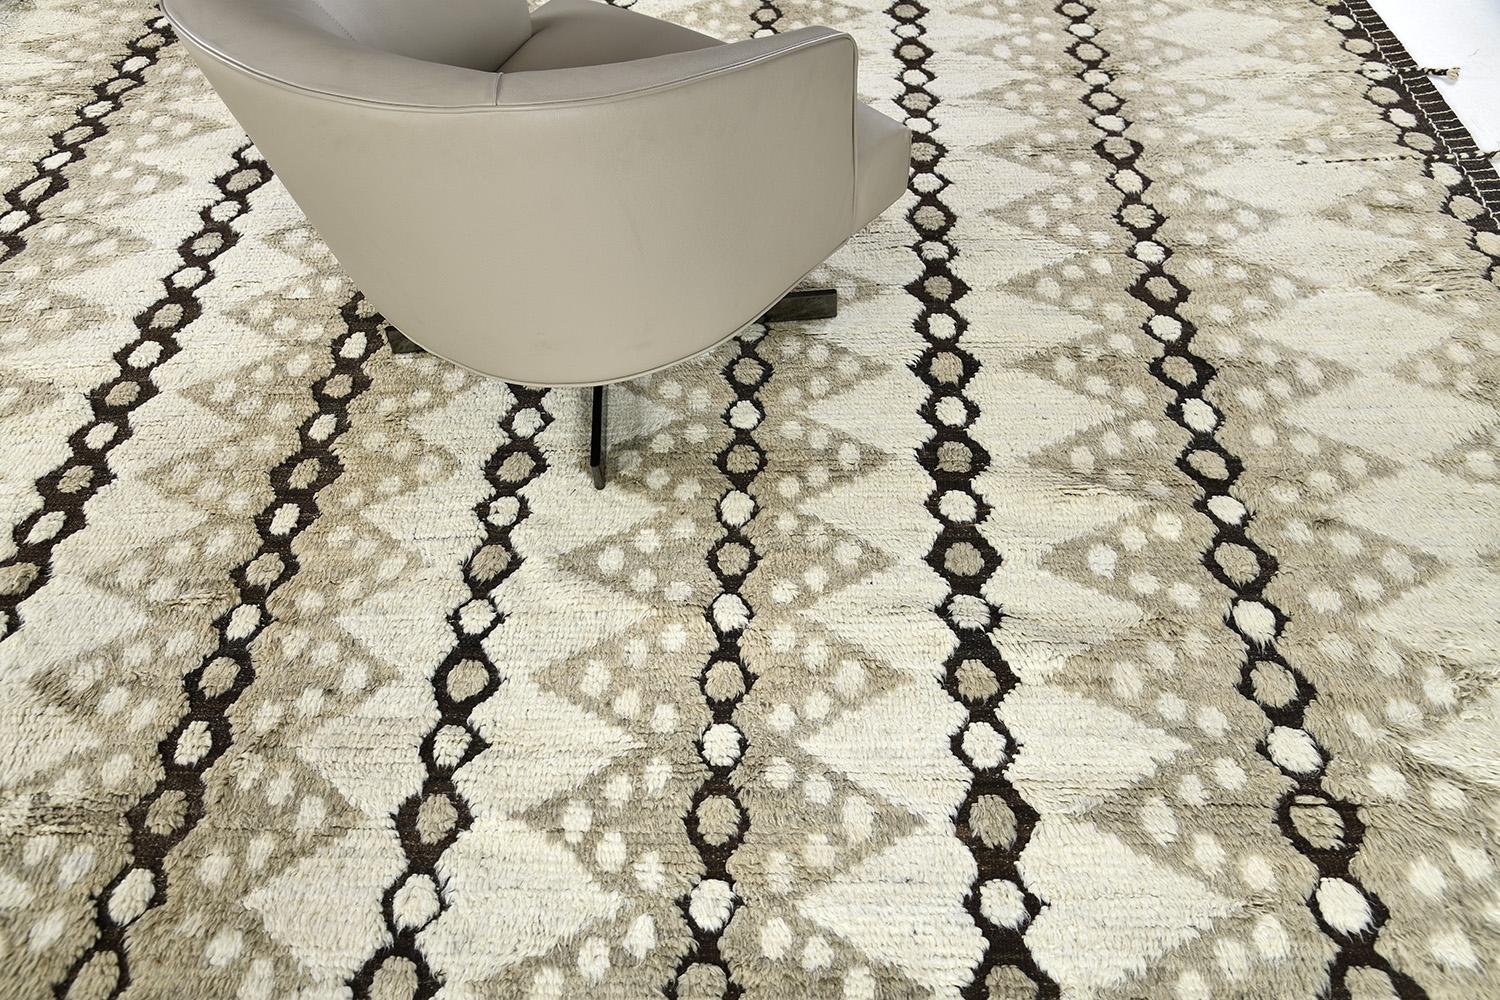 The 'Modlina' rug is a handwoven wool piece inspired by vintage Scandinavian design elements and recreated for the modern design world. The rug's shag balance and harmony, handwoven with a neutral flat weave and unique piles of yellow and natural